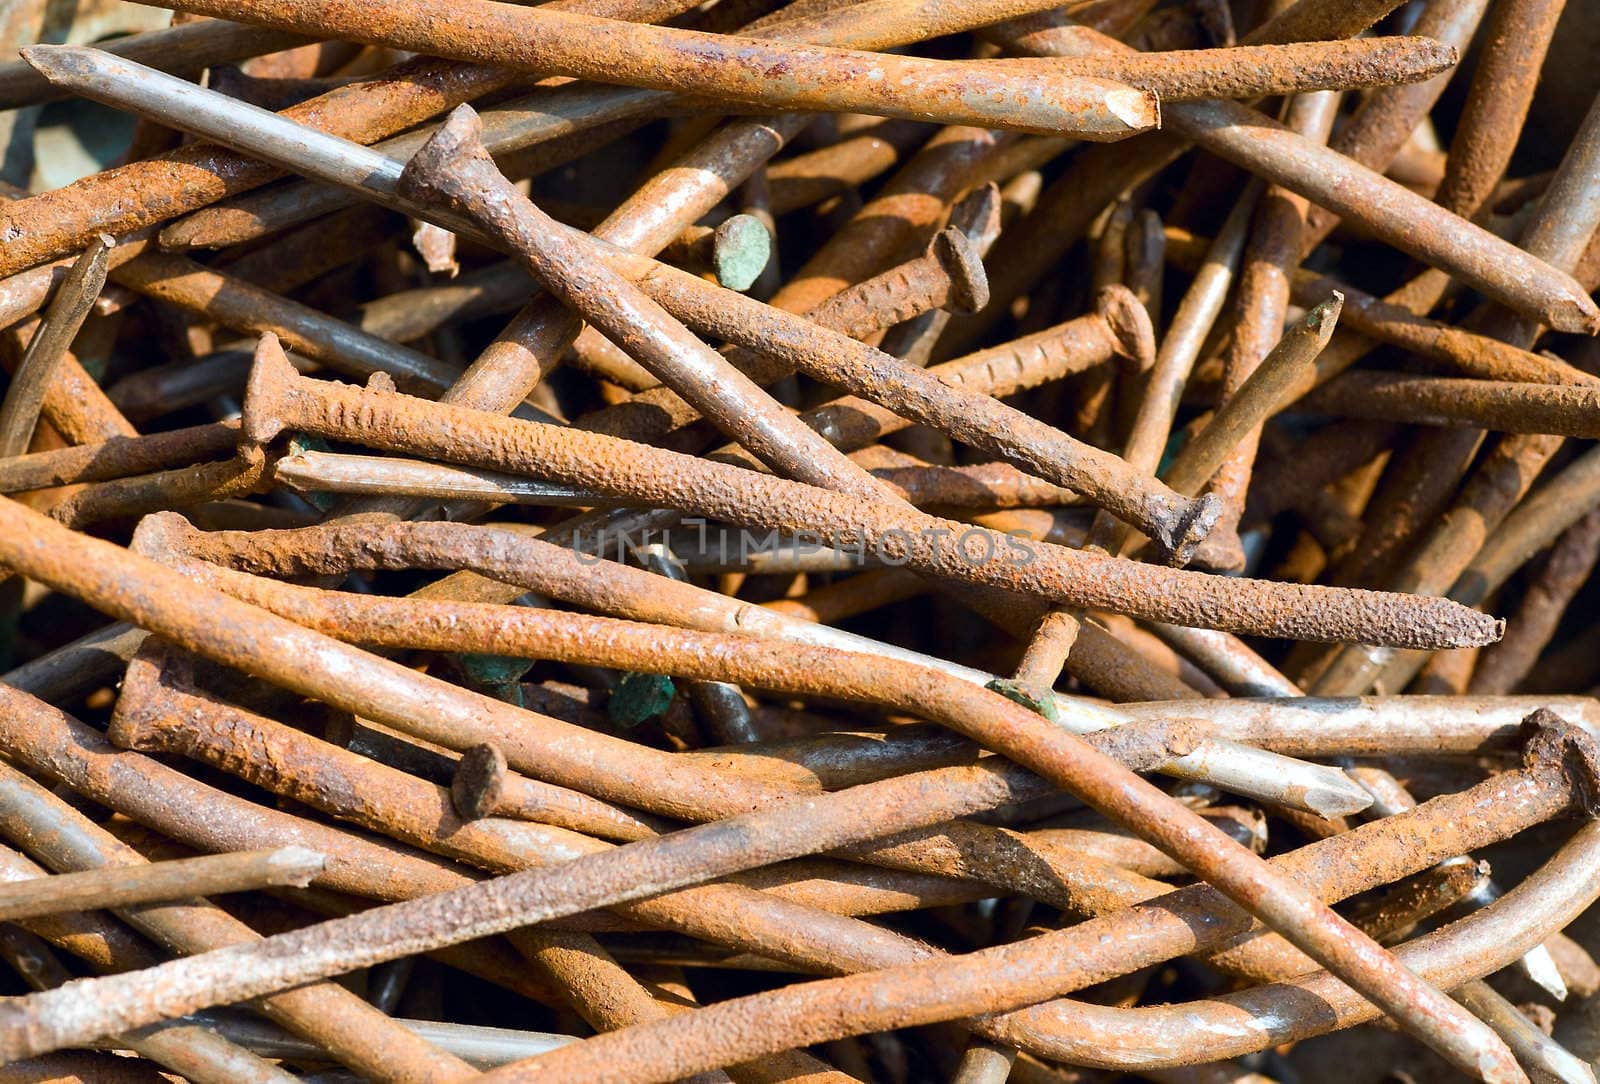 Large pile of rusty  nails. Backgrounds